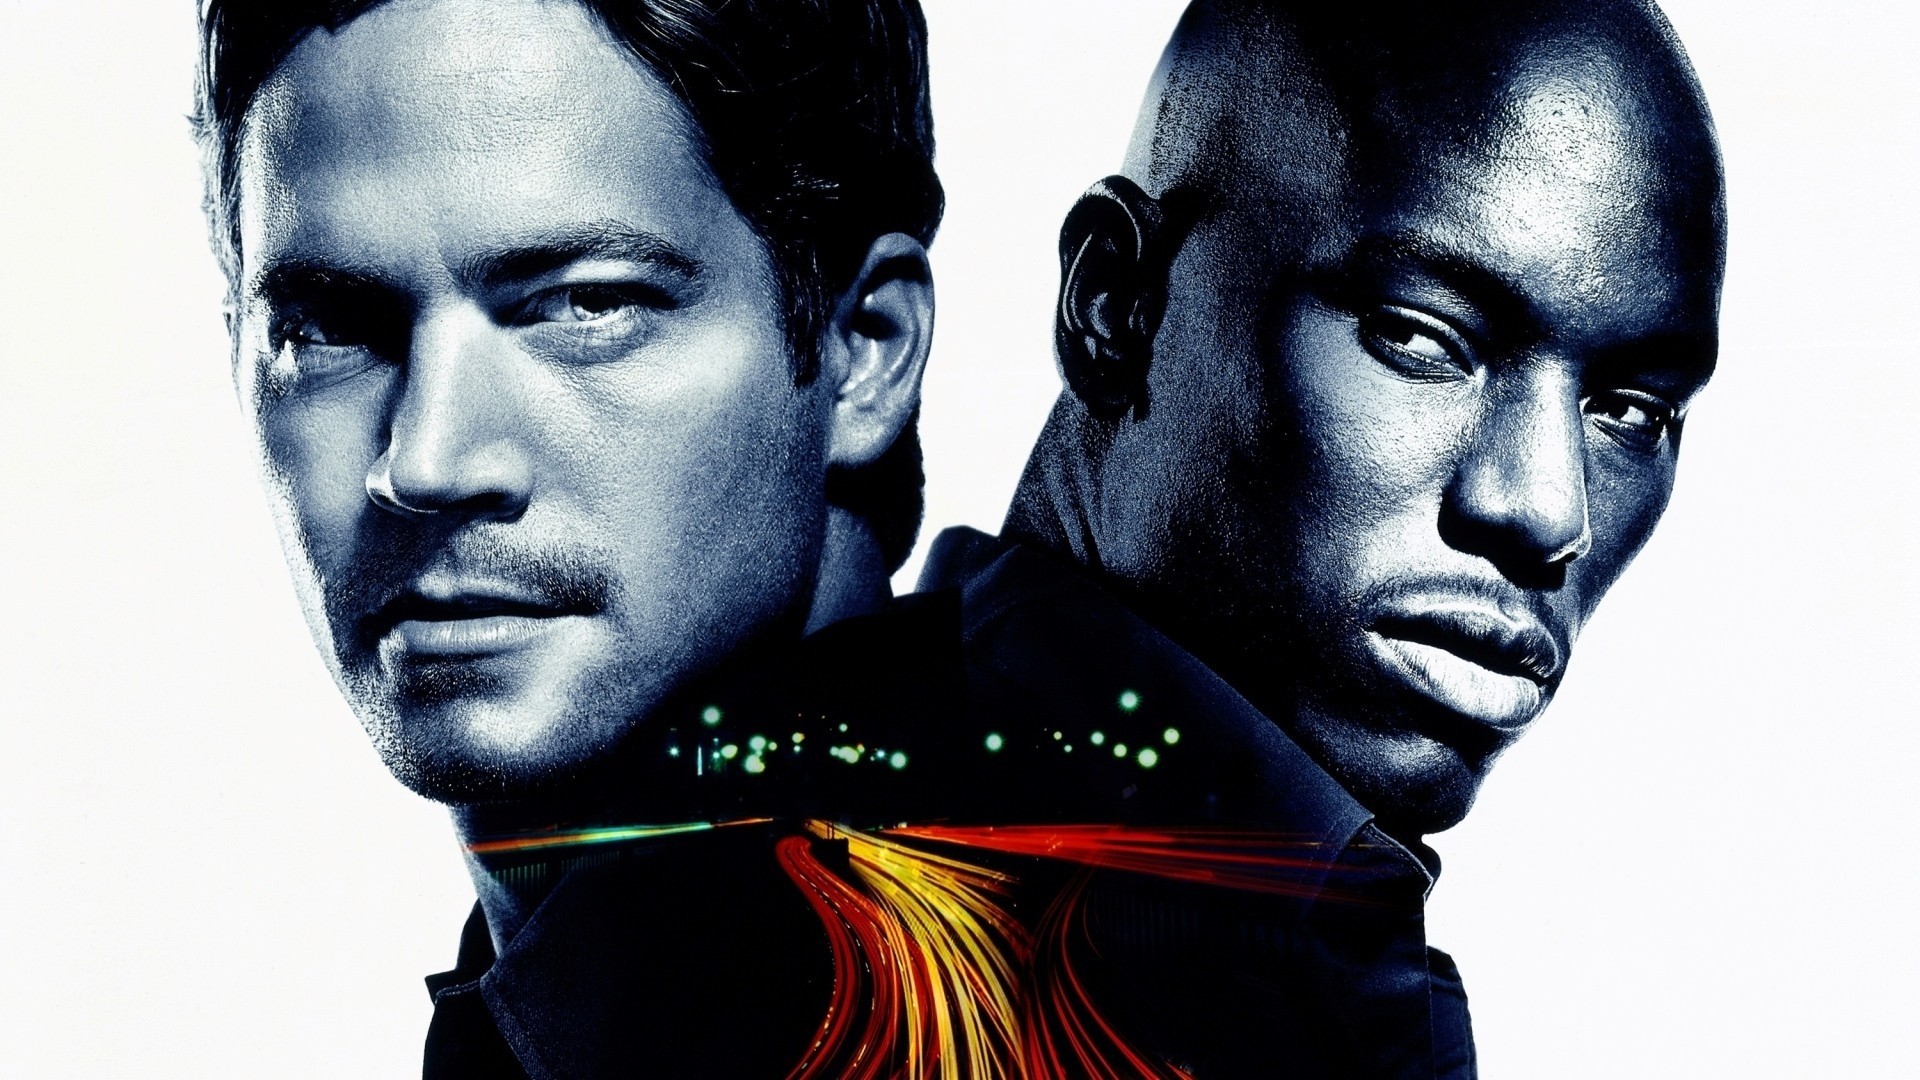 Paul Walker Fast And Furious Tyrese Gibson Movie Poster 1920x1080